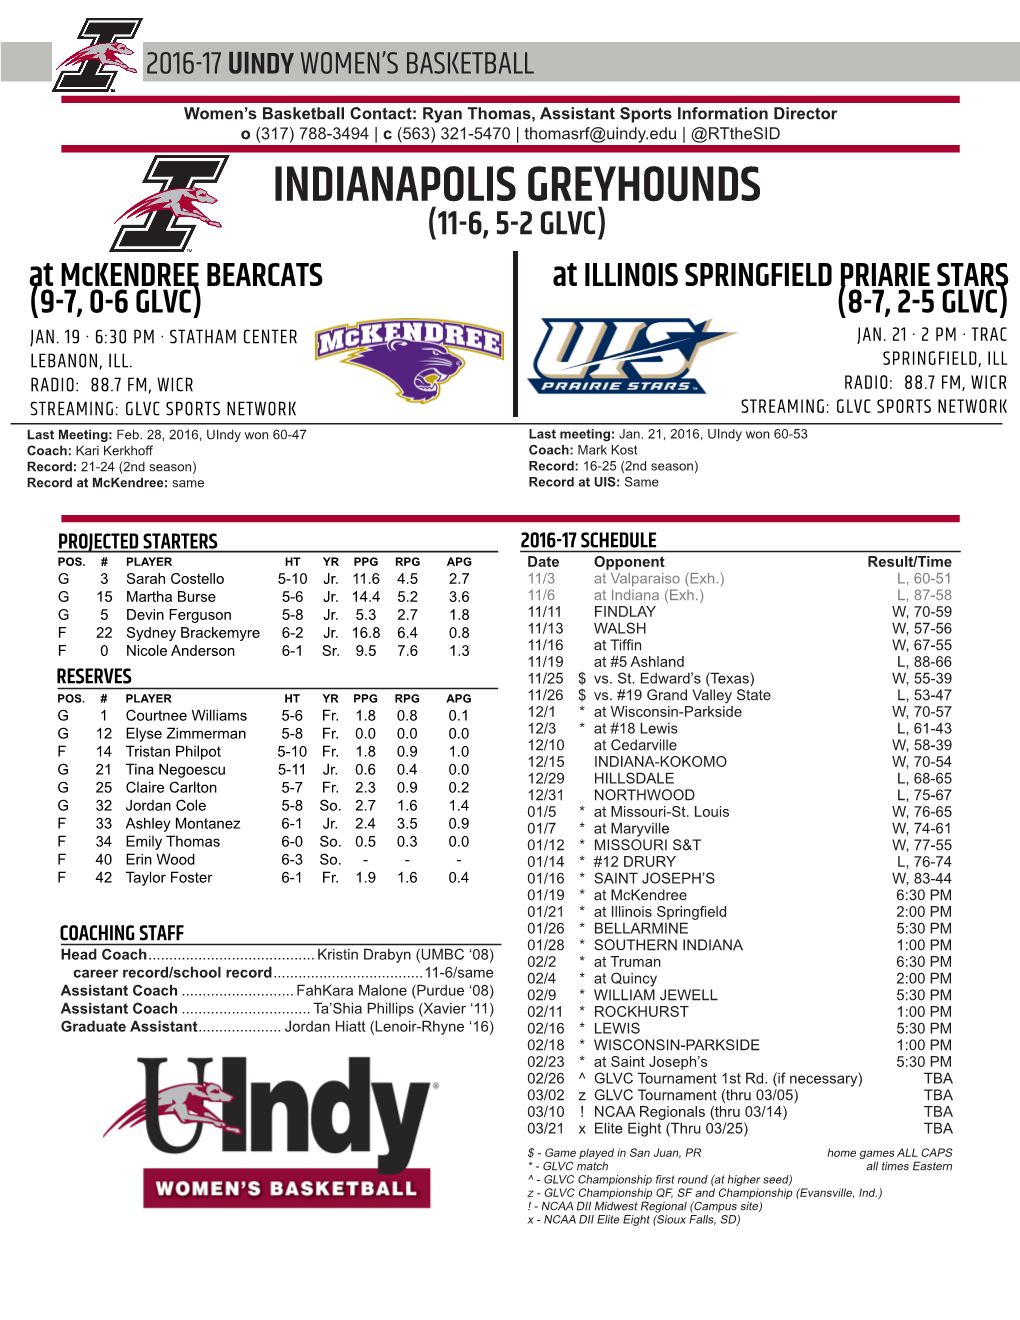 INDIANAPOLIS GREYHOUNDS (11-6, 5-2 GLVC) at Mckendree BEARCATS at ILLINOIS SPRINGFIELD PRIARIE STARS (9-7, 0-6 GLVC) (8-7, 2-5 GLVC) JAN